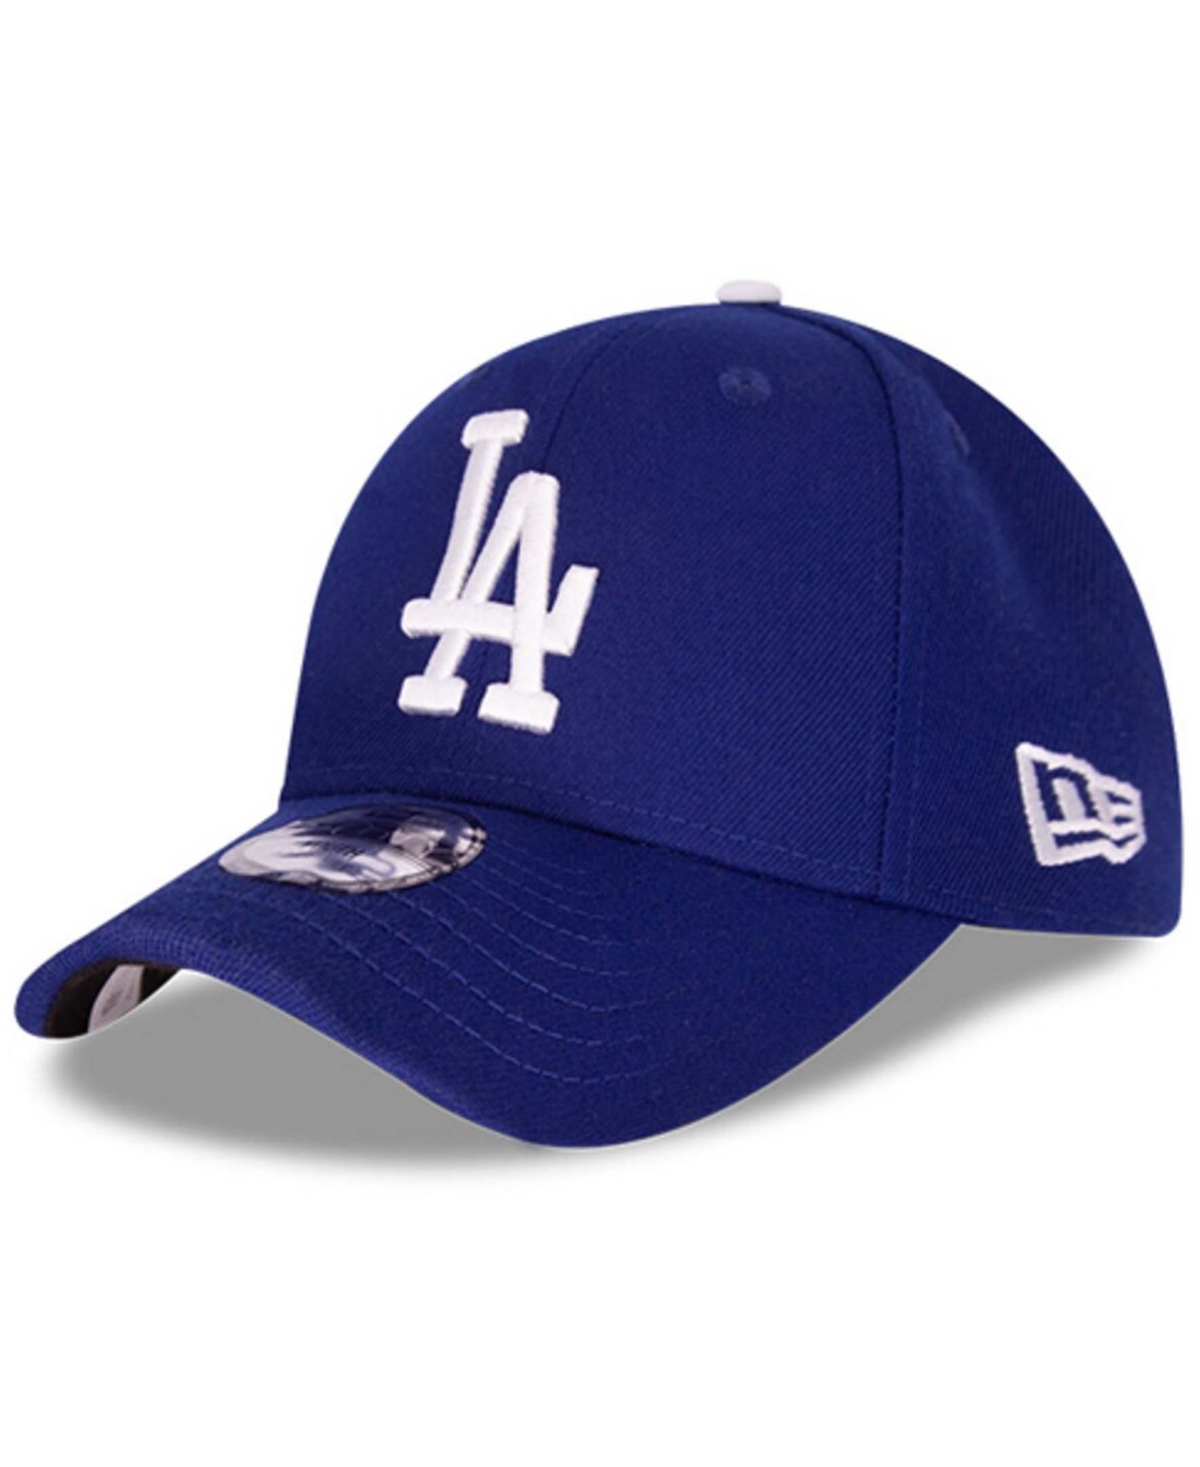 Nike New Era Youth Los Angeles Dodgers The League 9forty Adjustable Cap ...